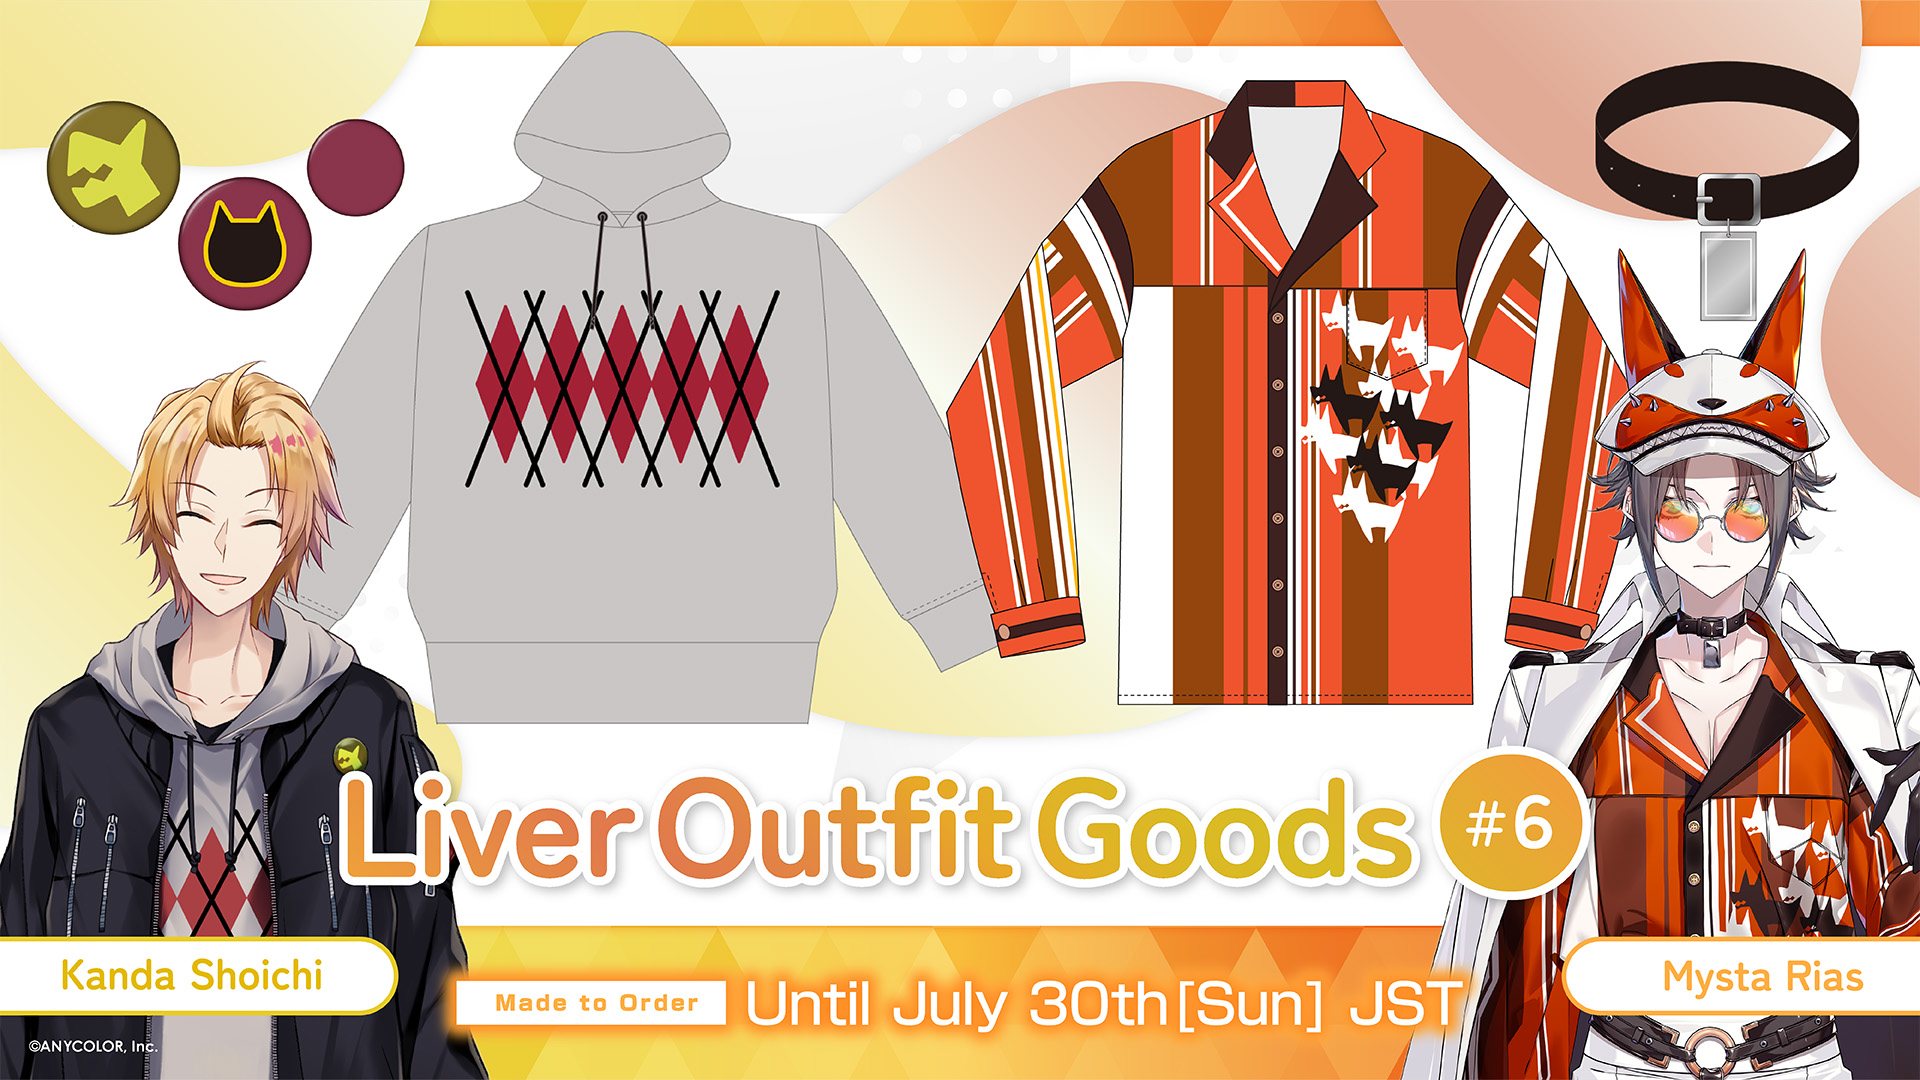 NIJISANJI EN announces “Liver Outfit Goods #6” | ANYCOLOR株式会社 